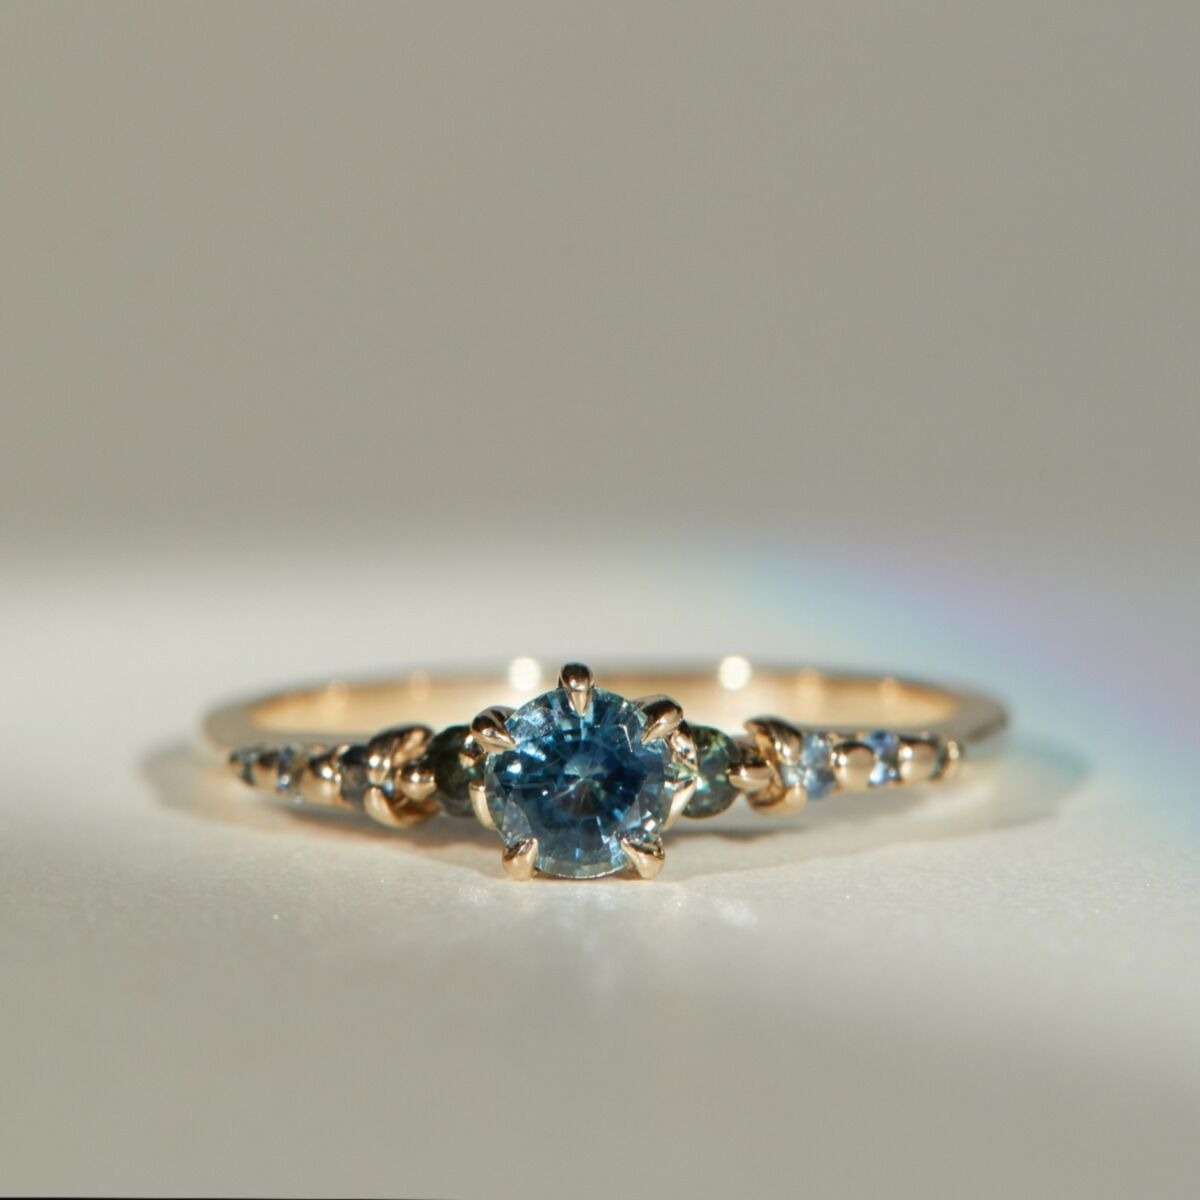 blue and green gemstone engagement ring